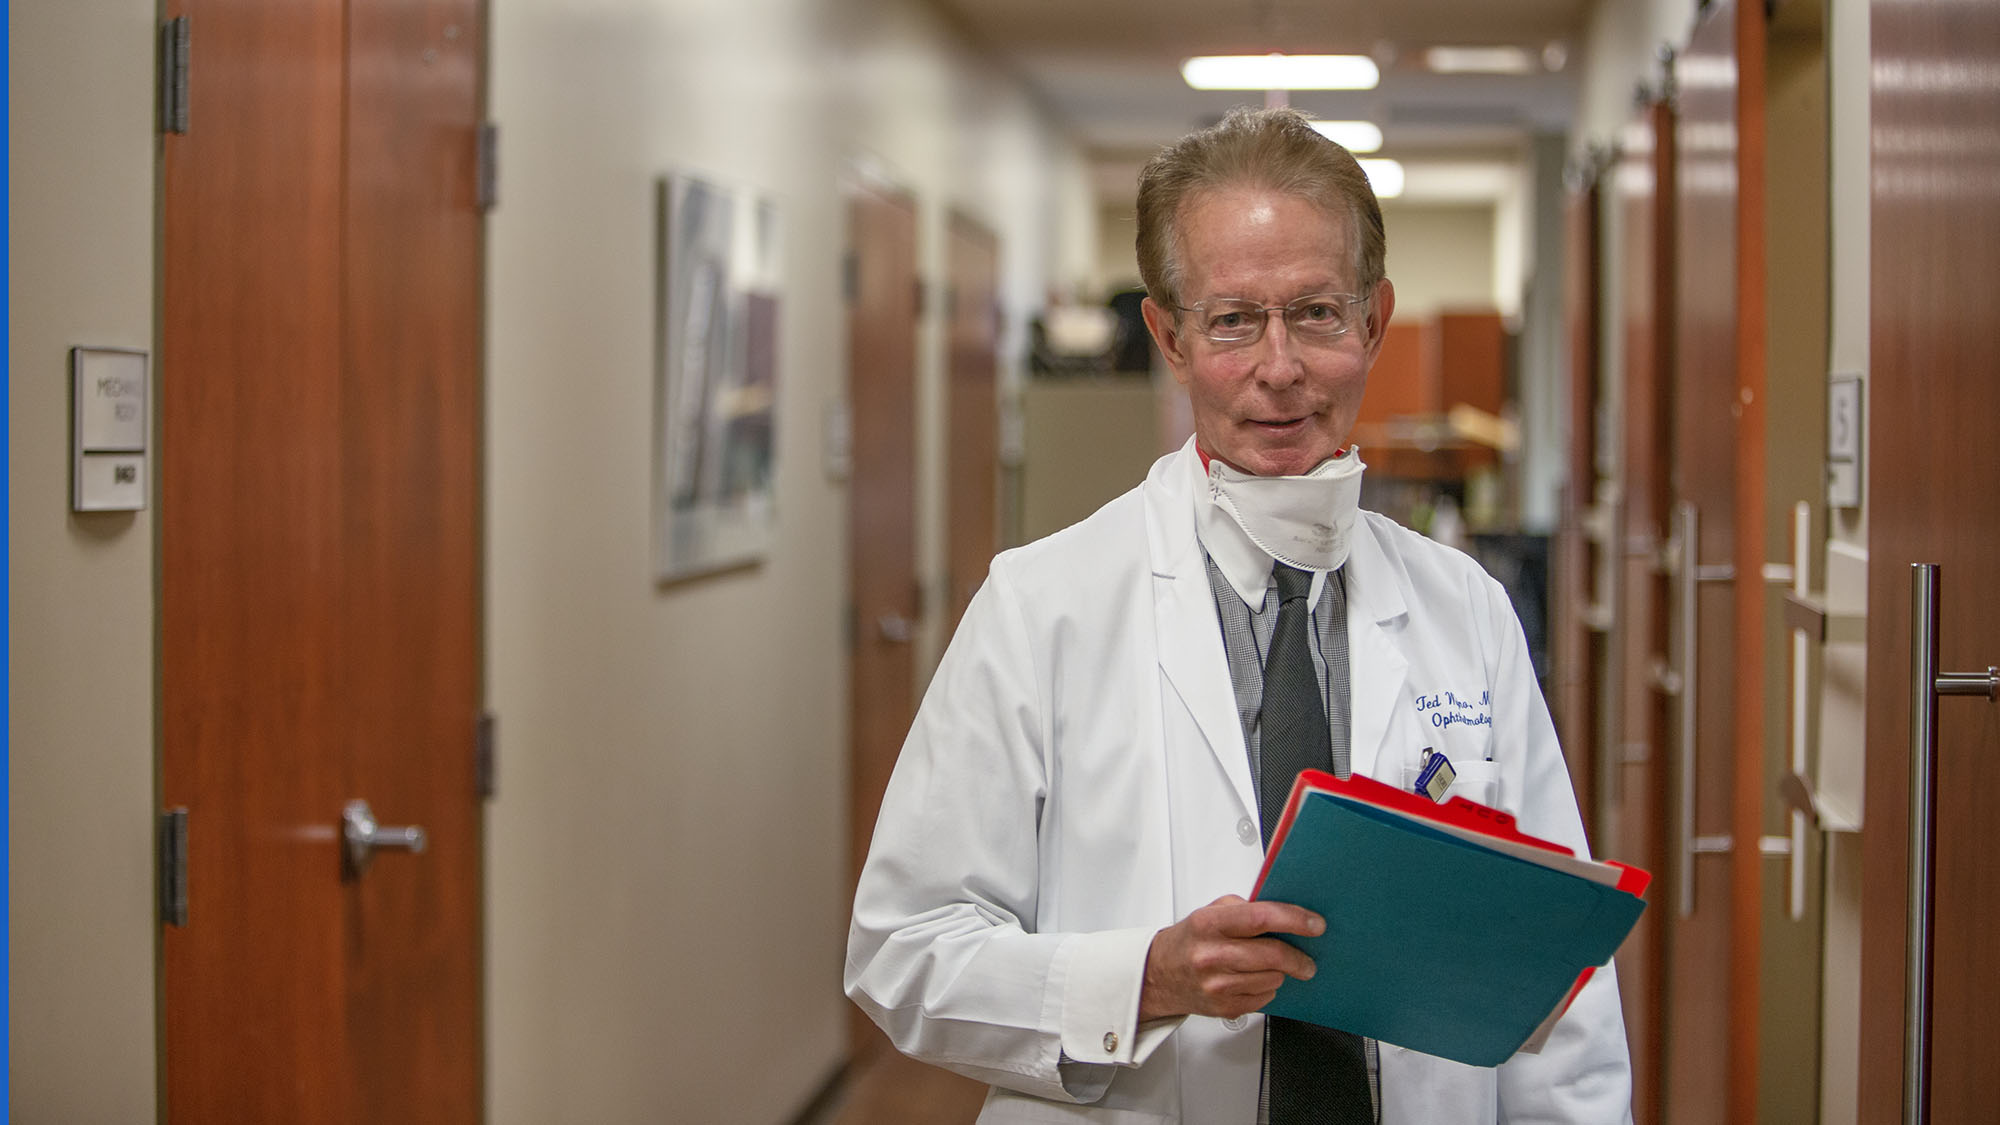 Dr. Ted Wojno holding a patient file